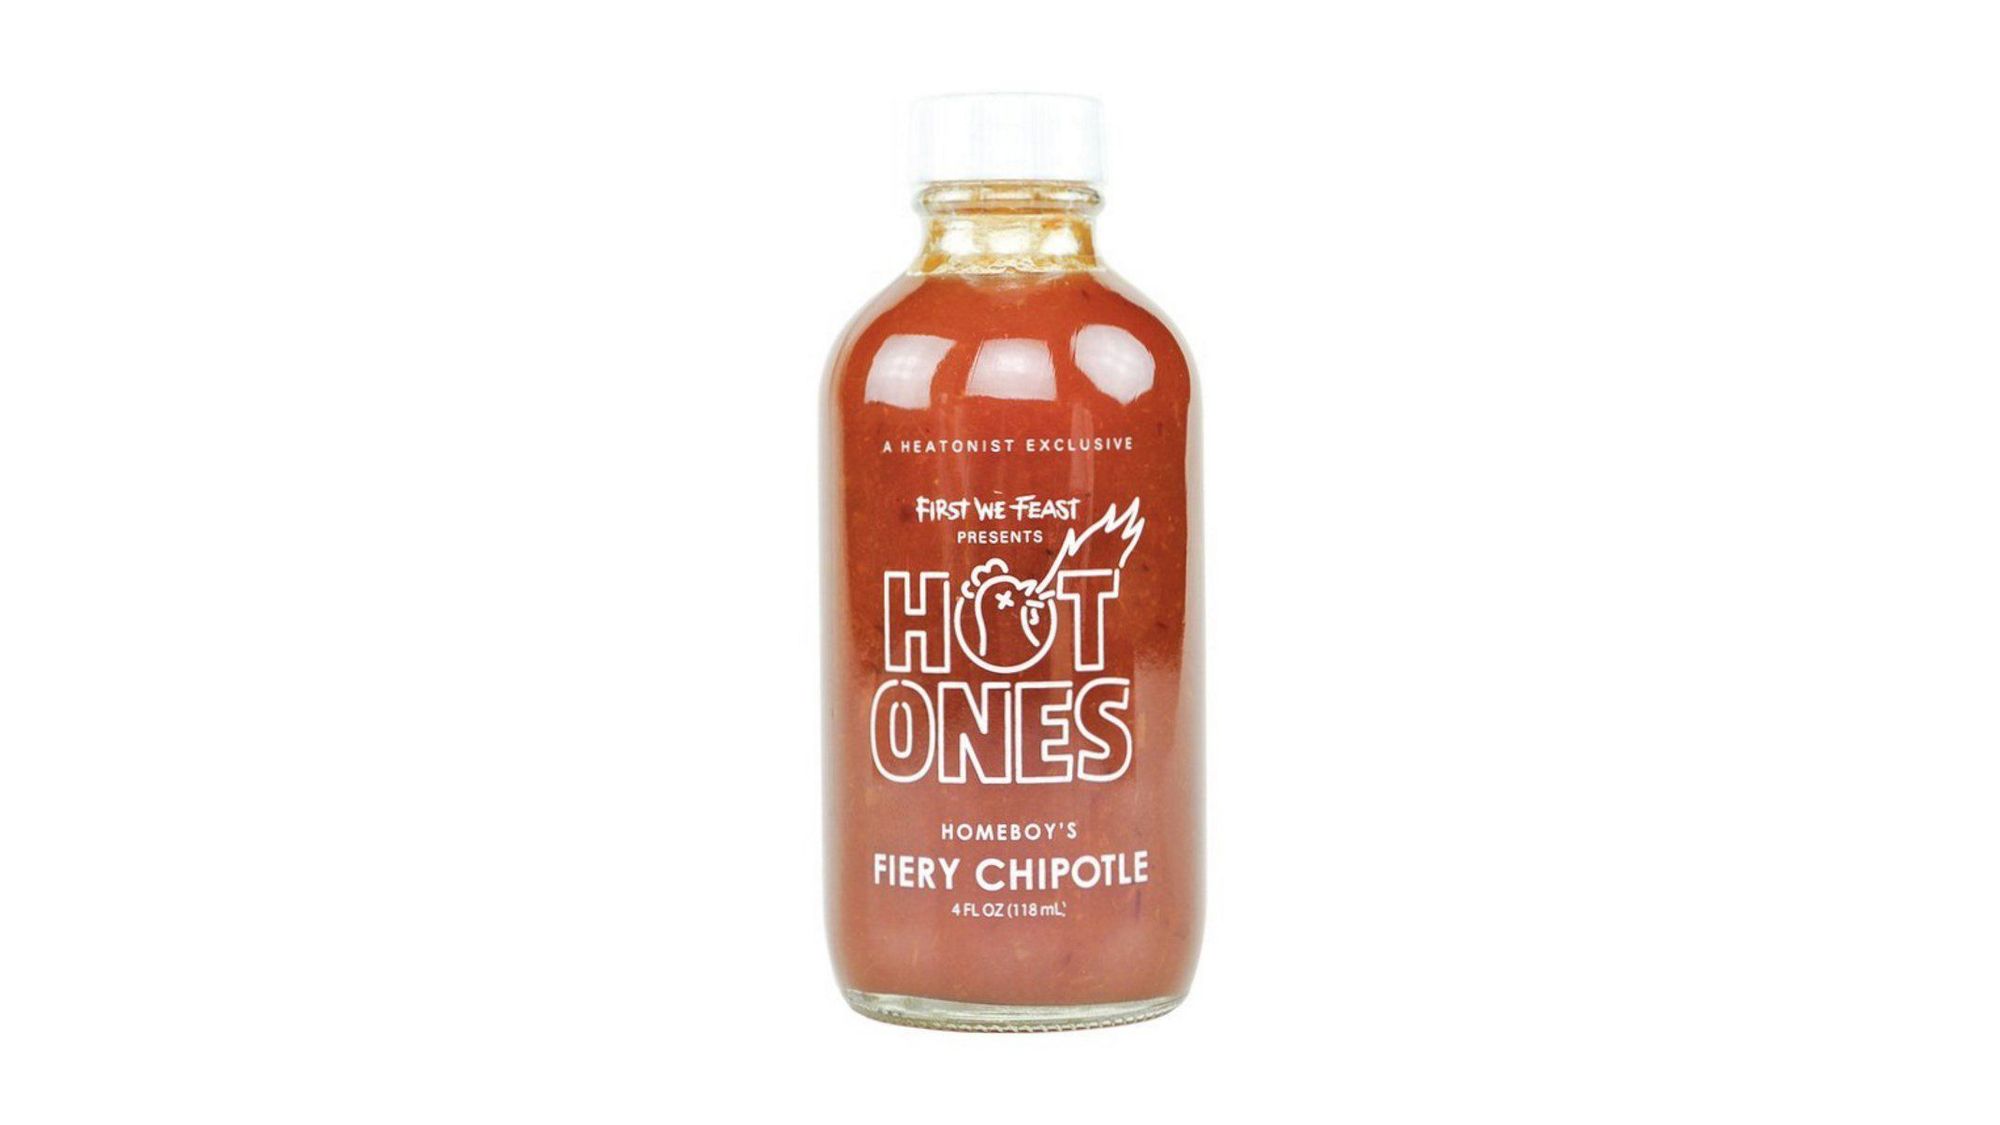 Fiery_Chipotle_by_The_Hot_Ones_Hot_Sauce.jpg